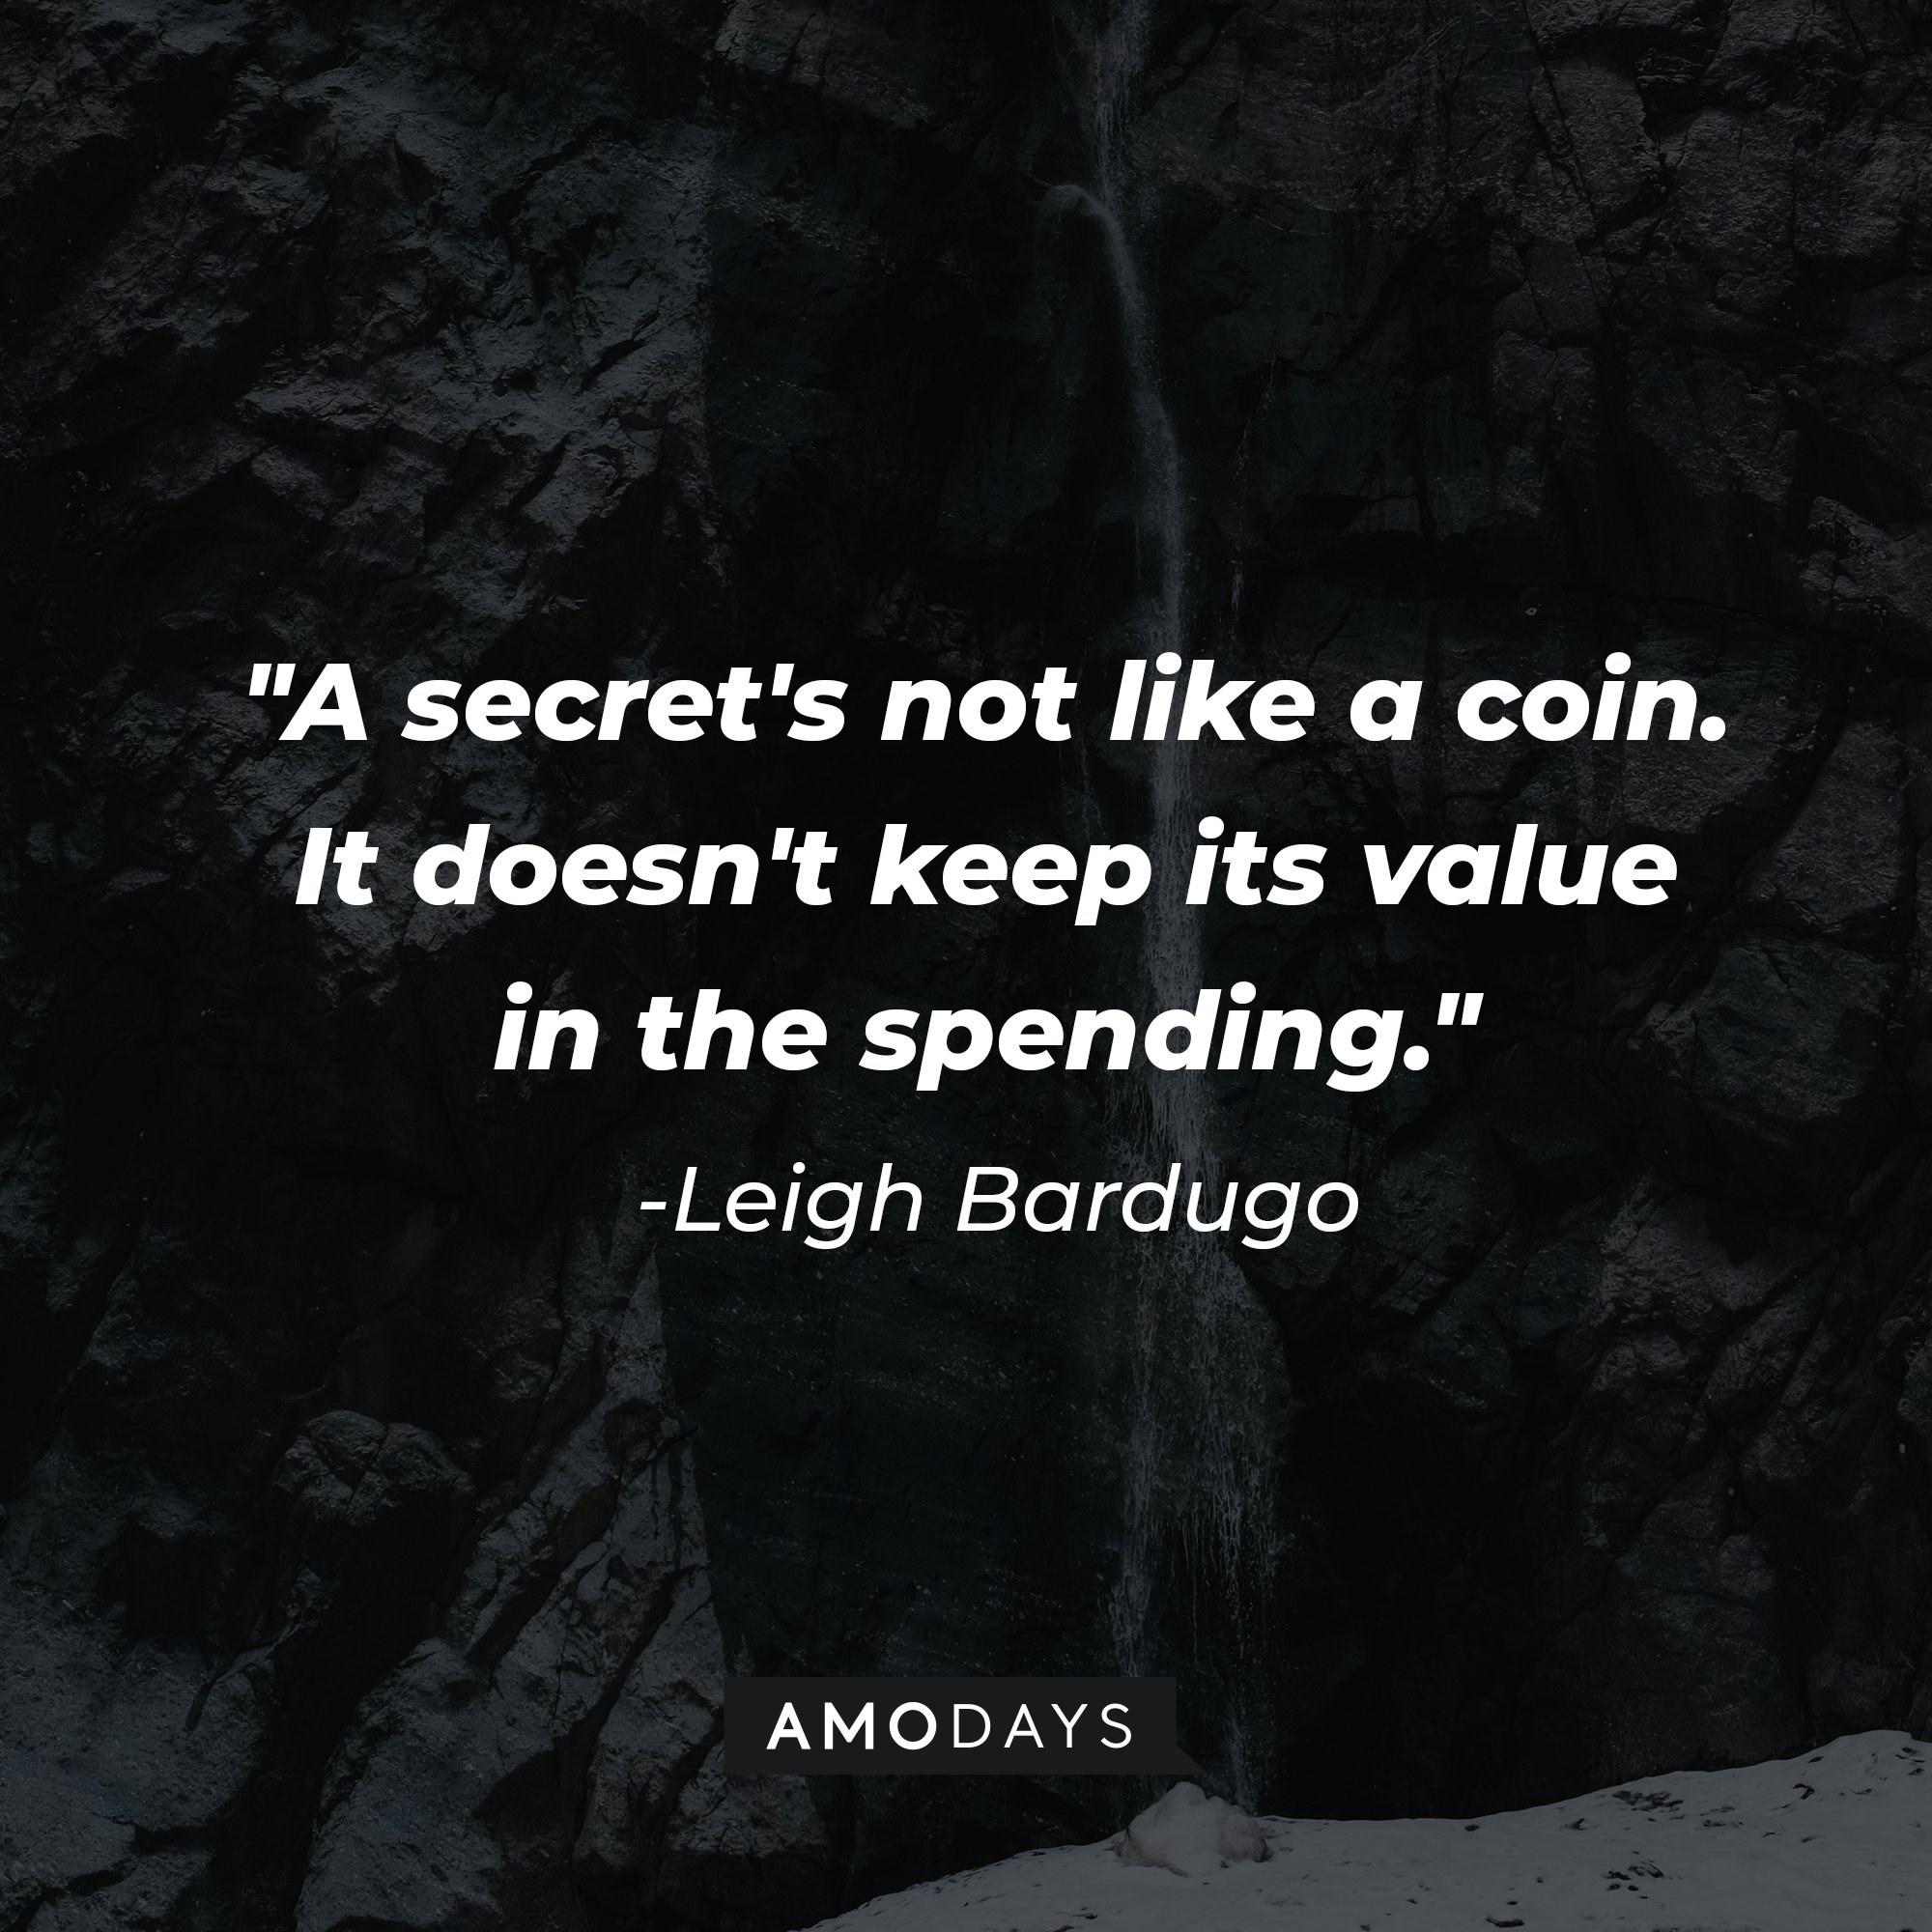  Leigh Bardugo’s quote: "A secret's not like a coin. It doesn't keep its value in the spending." | Image: AmoDays